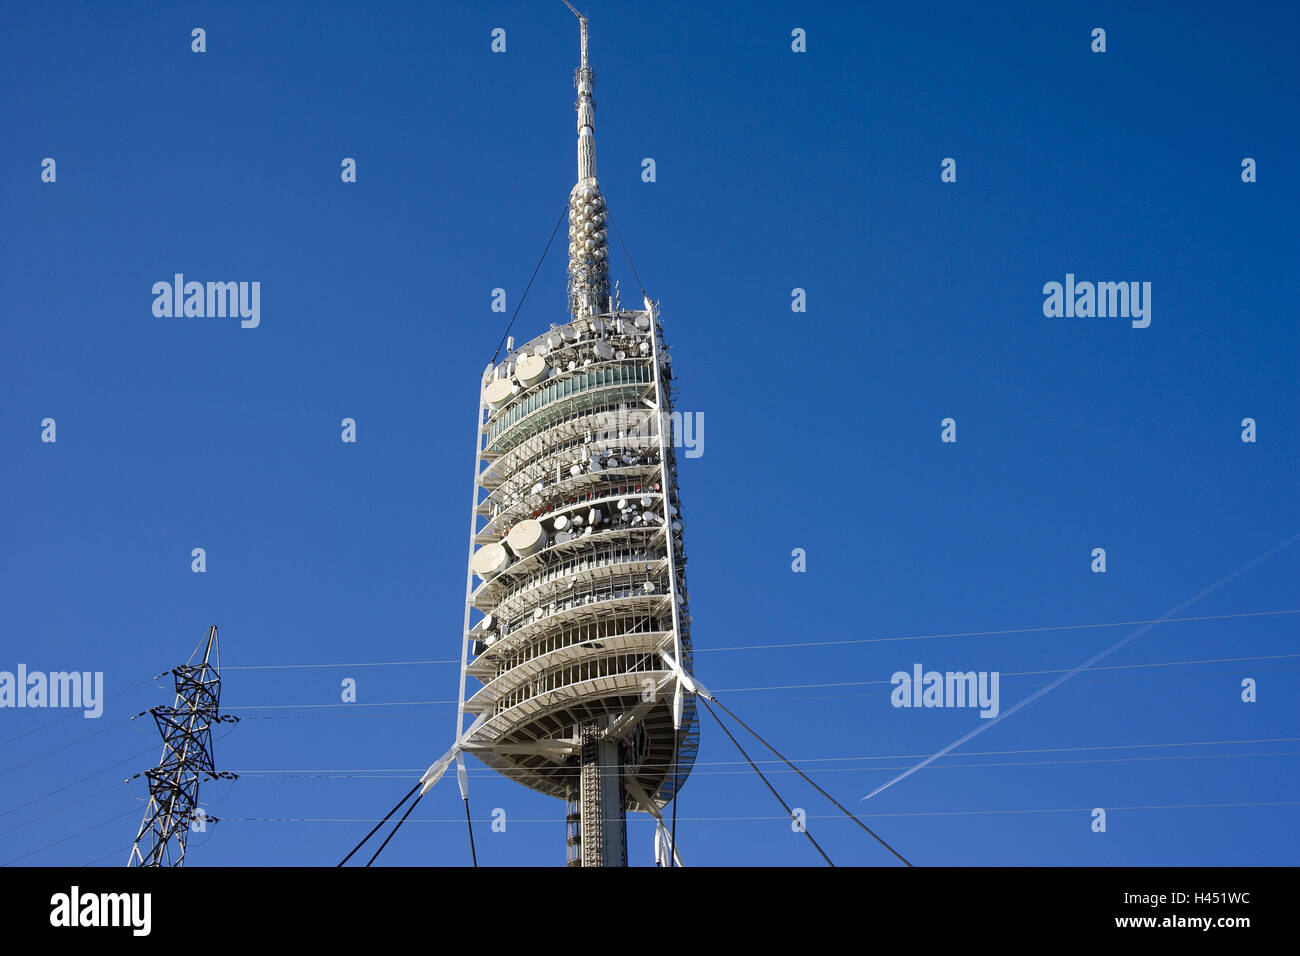 Spain, Catalonia, Barcelona, Torre de Collserola, detail, heaven, town, building, structure, architecture, tower, Tibidabo, sending tower, radio tower, television tower, observation tower, Collserola tower, cords, high-tension circuits, power poles, power supply lines, place of interest, outside, Stock Photo